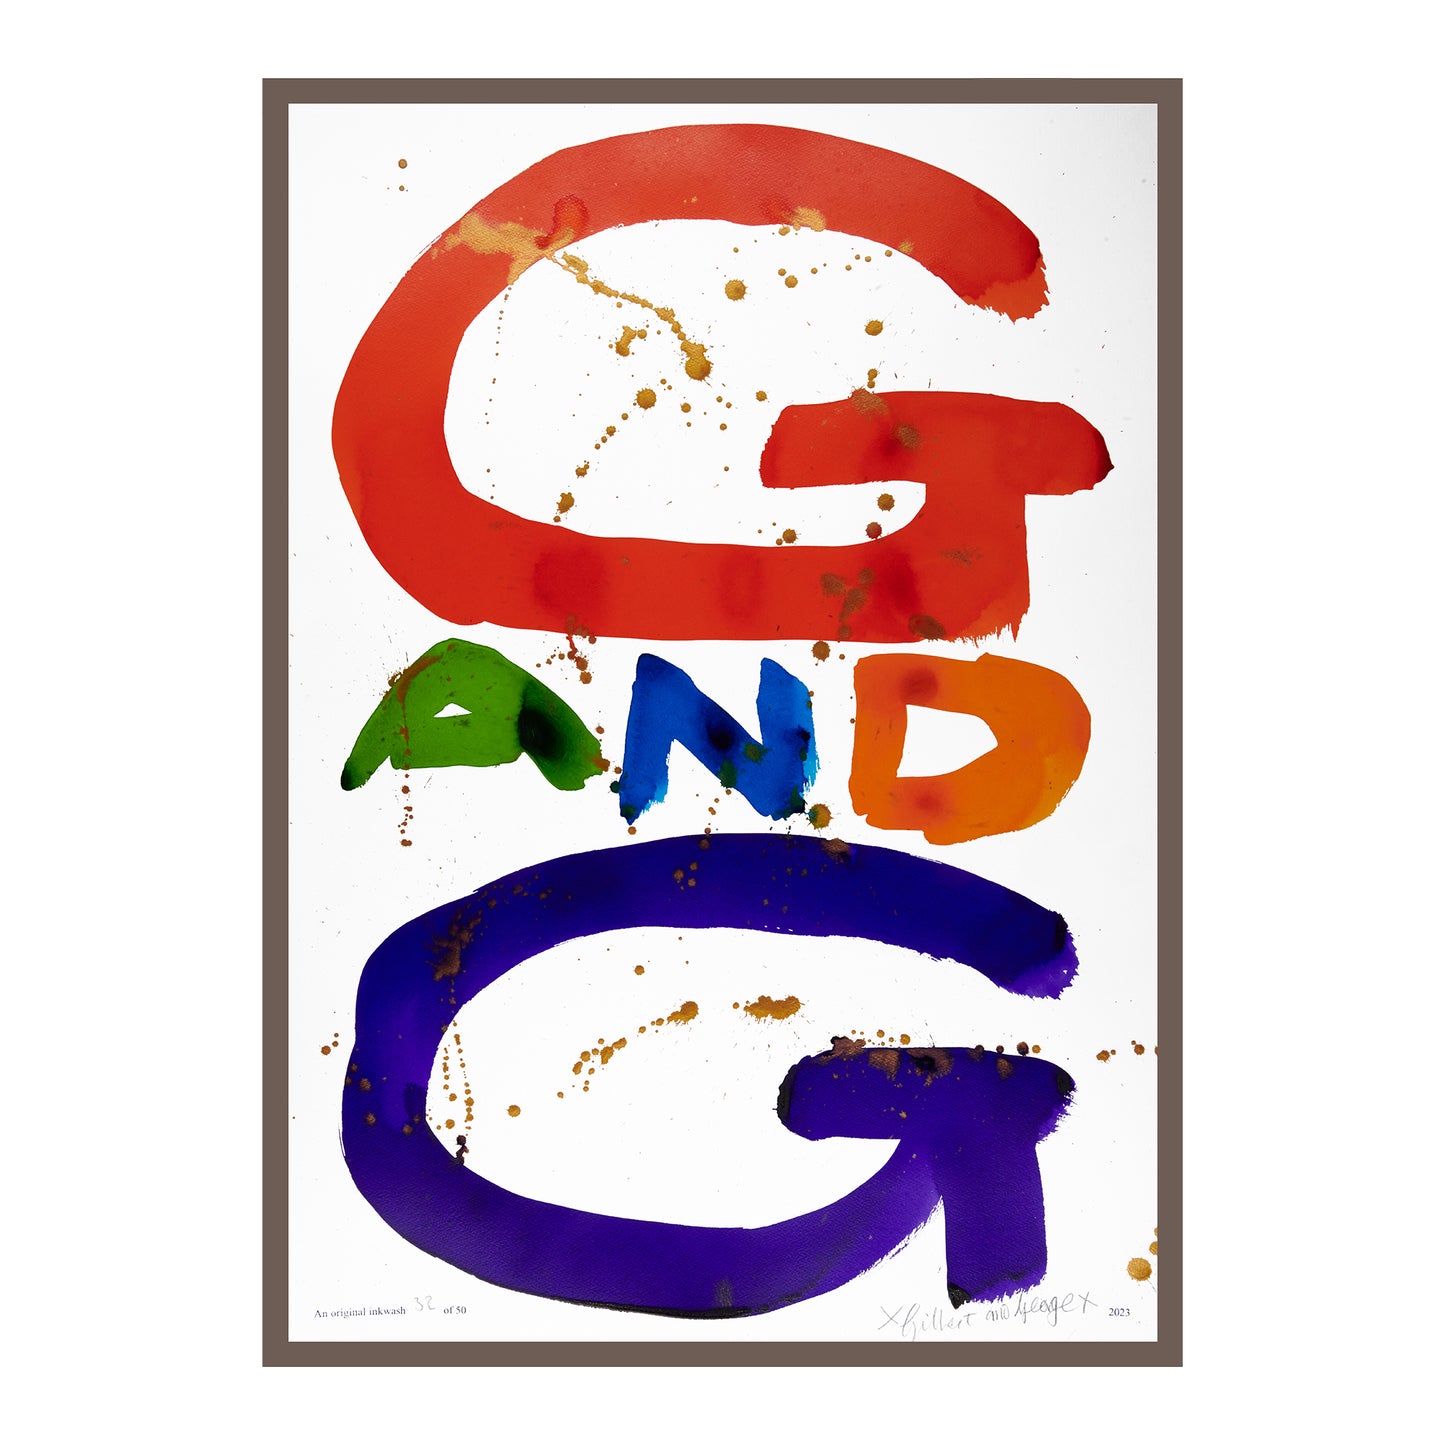 G AND G (v)